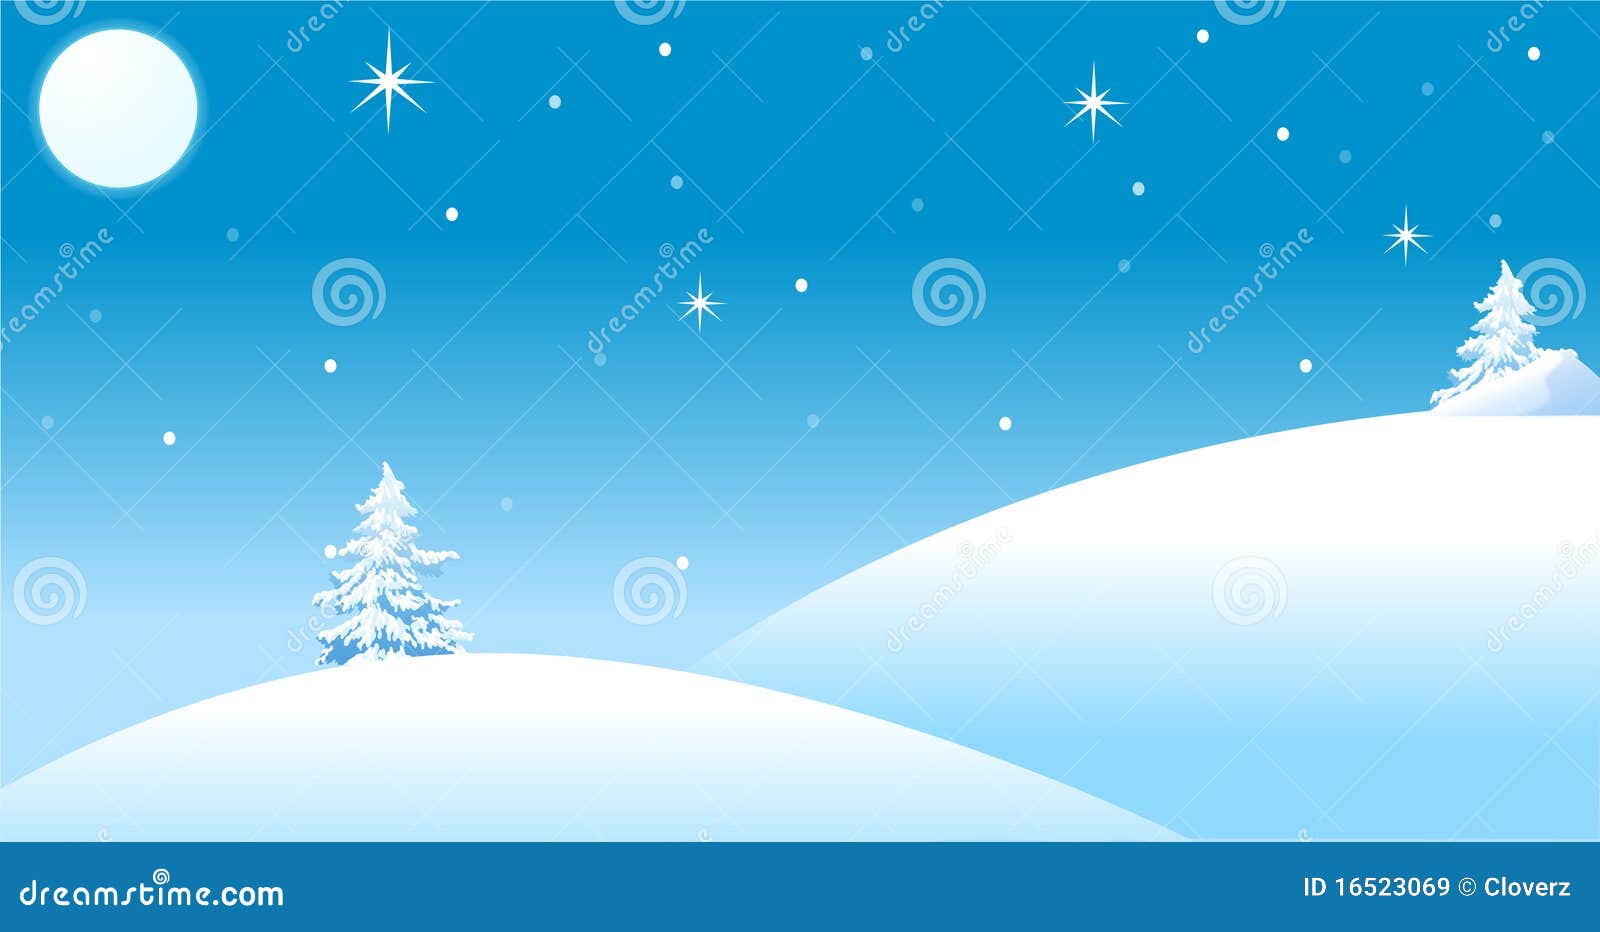 Winter On The Hill Royalty Free Stock Images - Image: 16523069